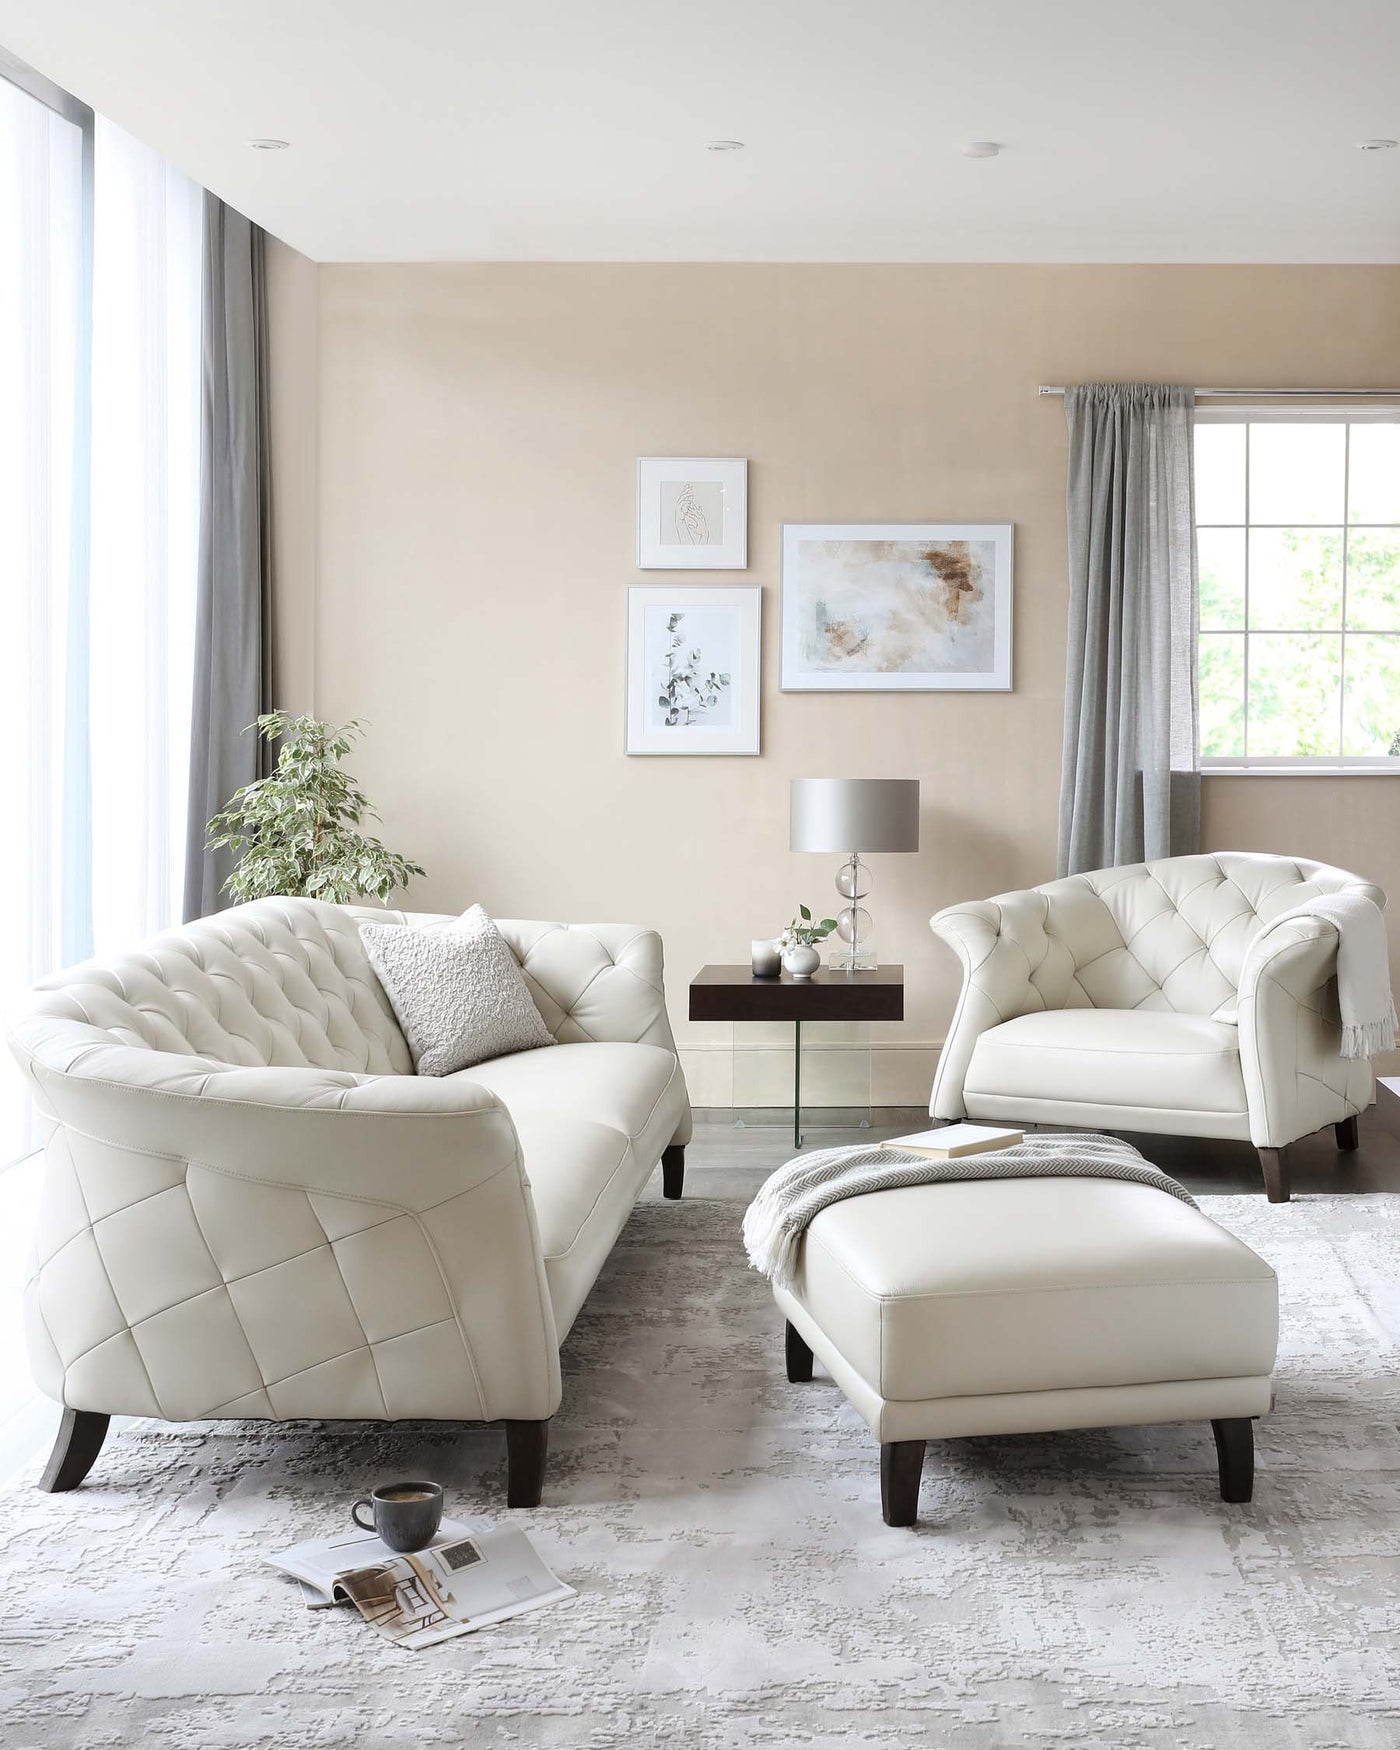 A modern living room set featuring a luxurious ivory leather sectional sofa with tufted upholstery and geometric stitching, accompanied by a matching armchair and ottoman. A sleek, dark wooden side table with a lower shelf and a simple table lamp sits beside the armchair. The set rests on a textured grey area rug, lending an elegant and contemporary feel to the space.